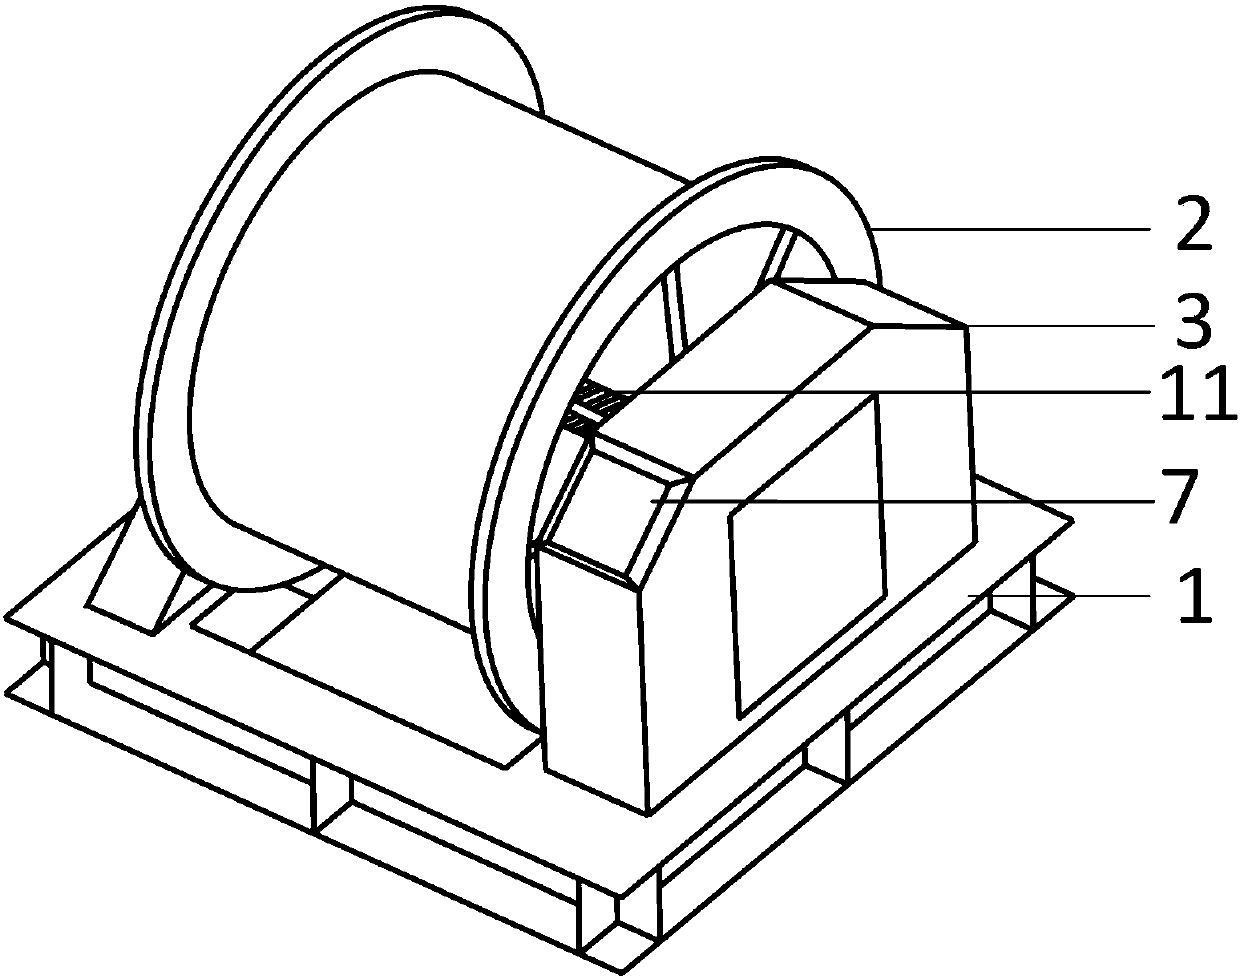 Marine seismic prospecting towing winch capable of automatically adjusting